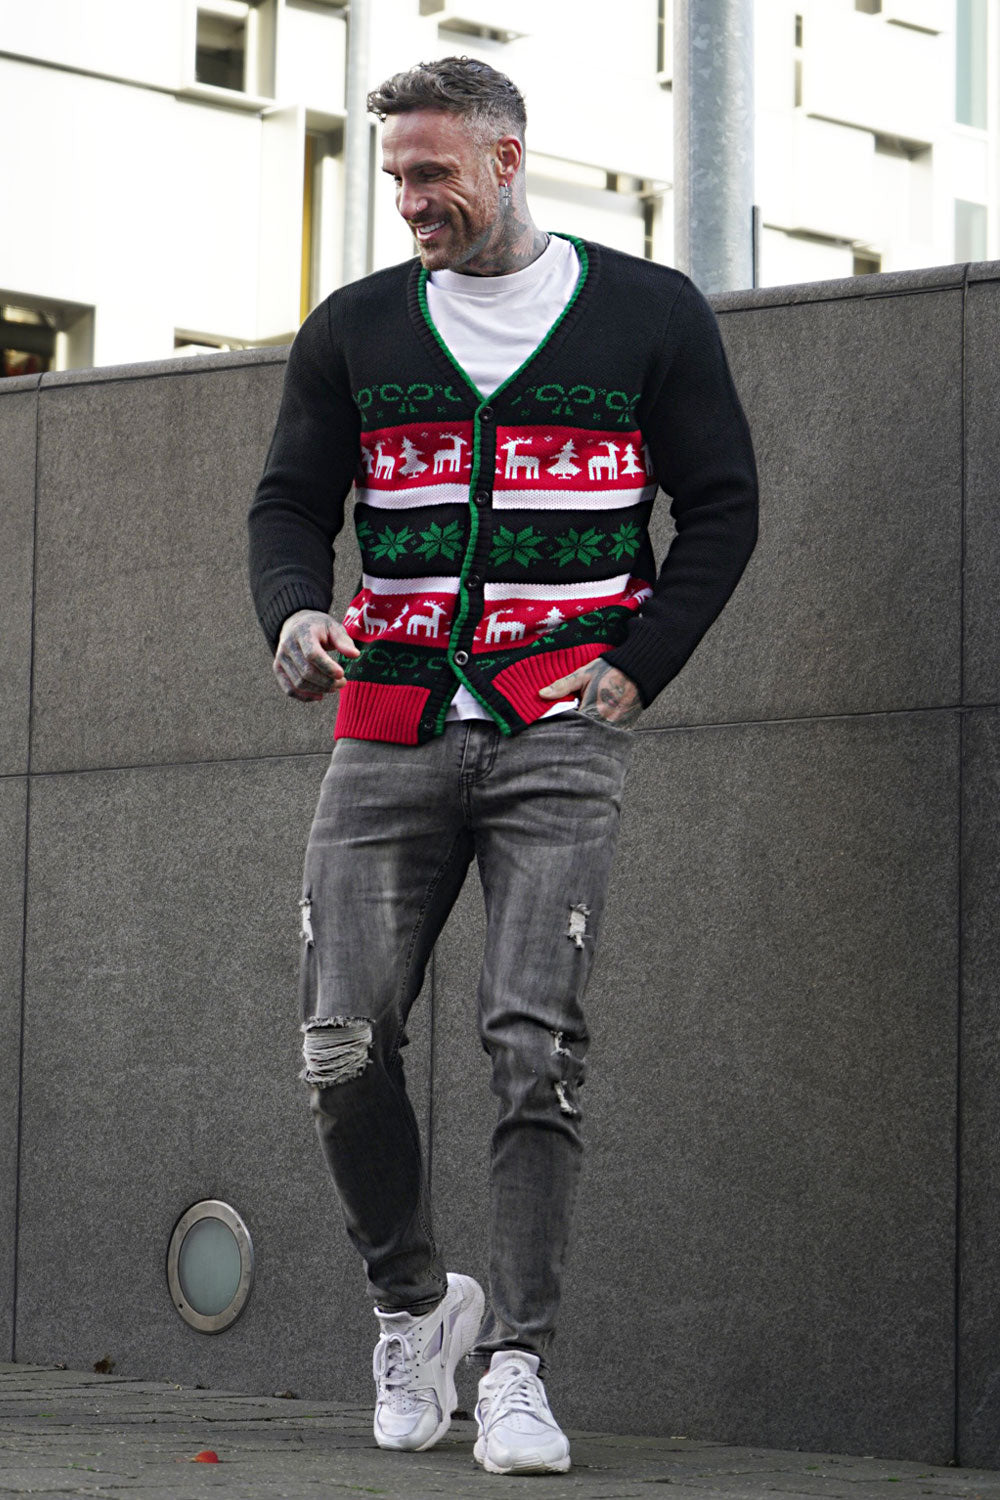 cool sweaters for guys - christmas print